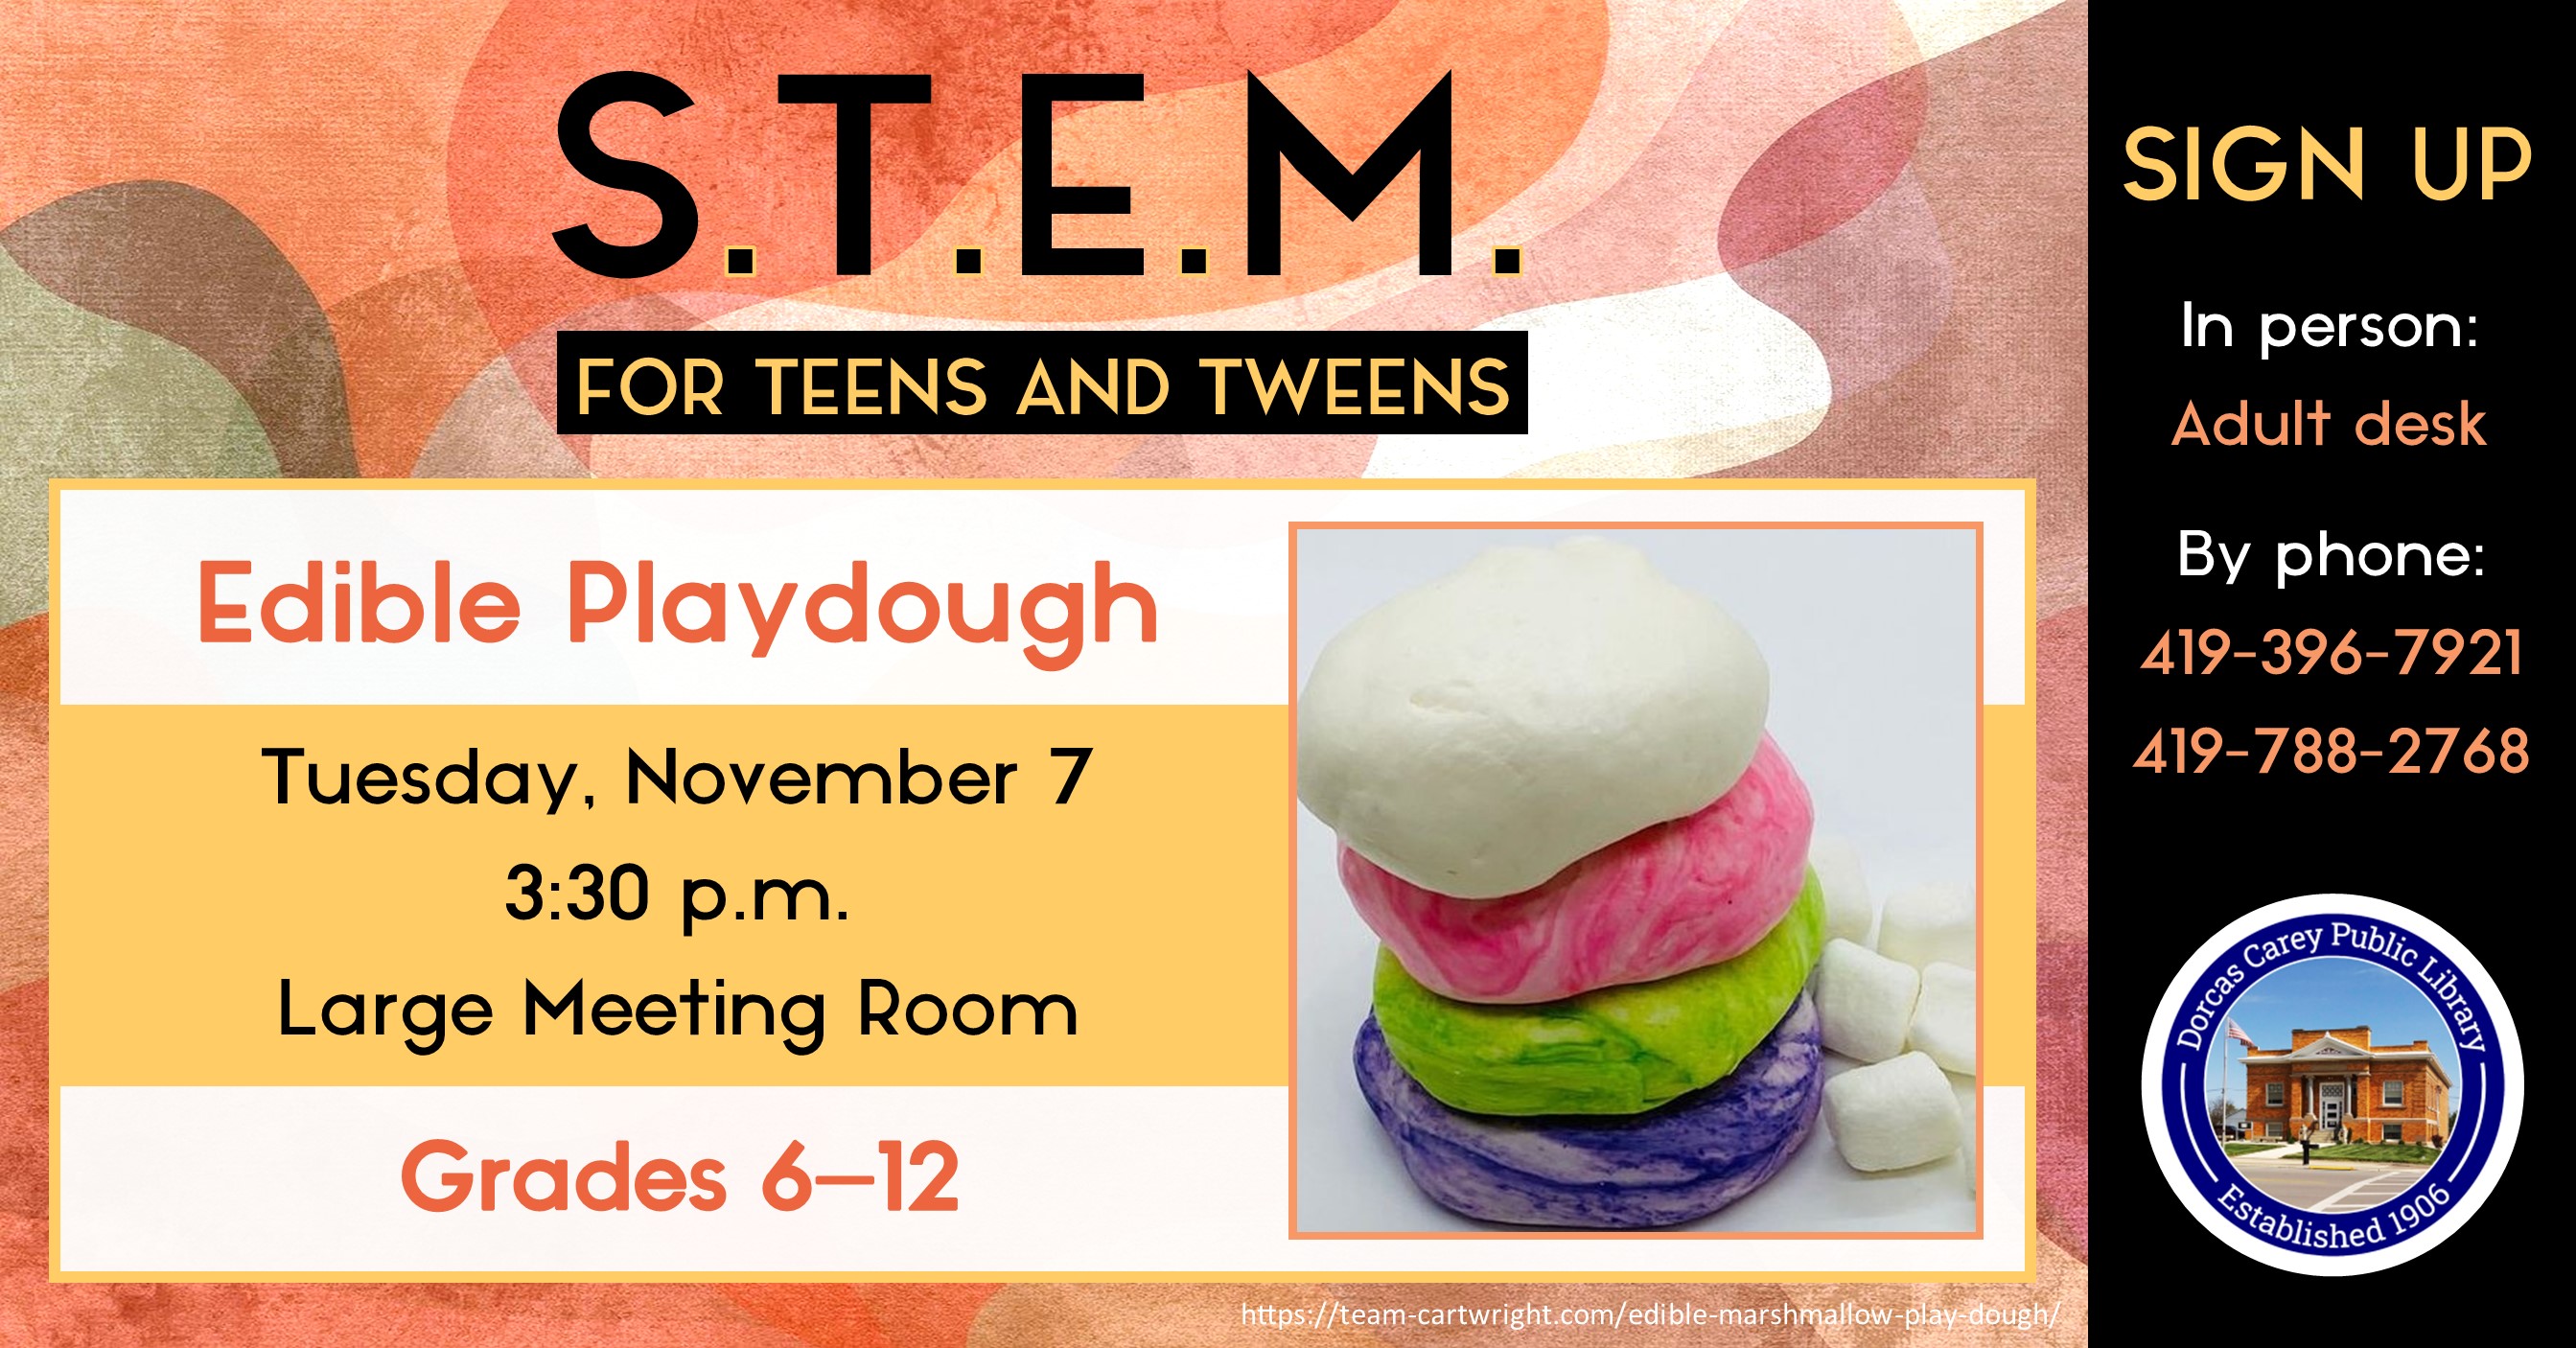 This program will be held on the second Thursday of the month from September through May at 3:30 p.m.  Come enjoy the hands-on-experience of learning.  Children in grades 6 -12 are encouraged to join the learning fun!  This month’s project: Edible Playdough.  Please sign-up at the adult circulation desk or by phone at 419-396-7921 or 419-788-2768.